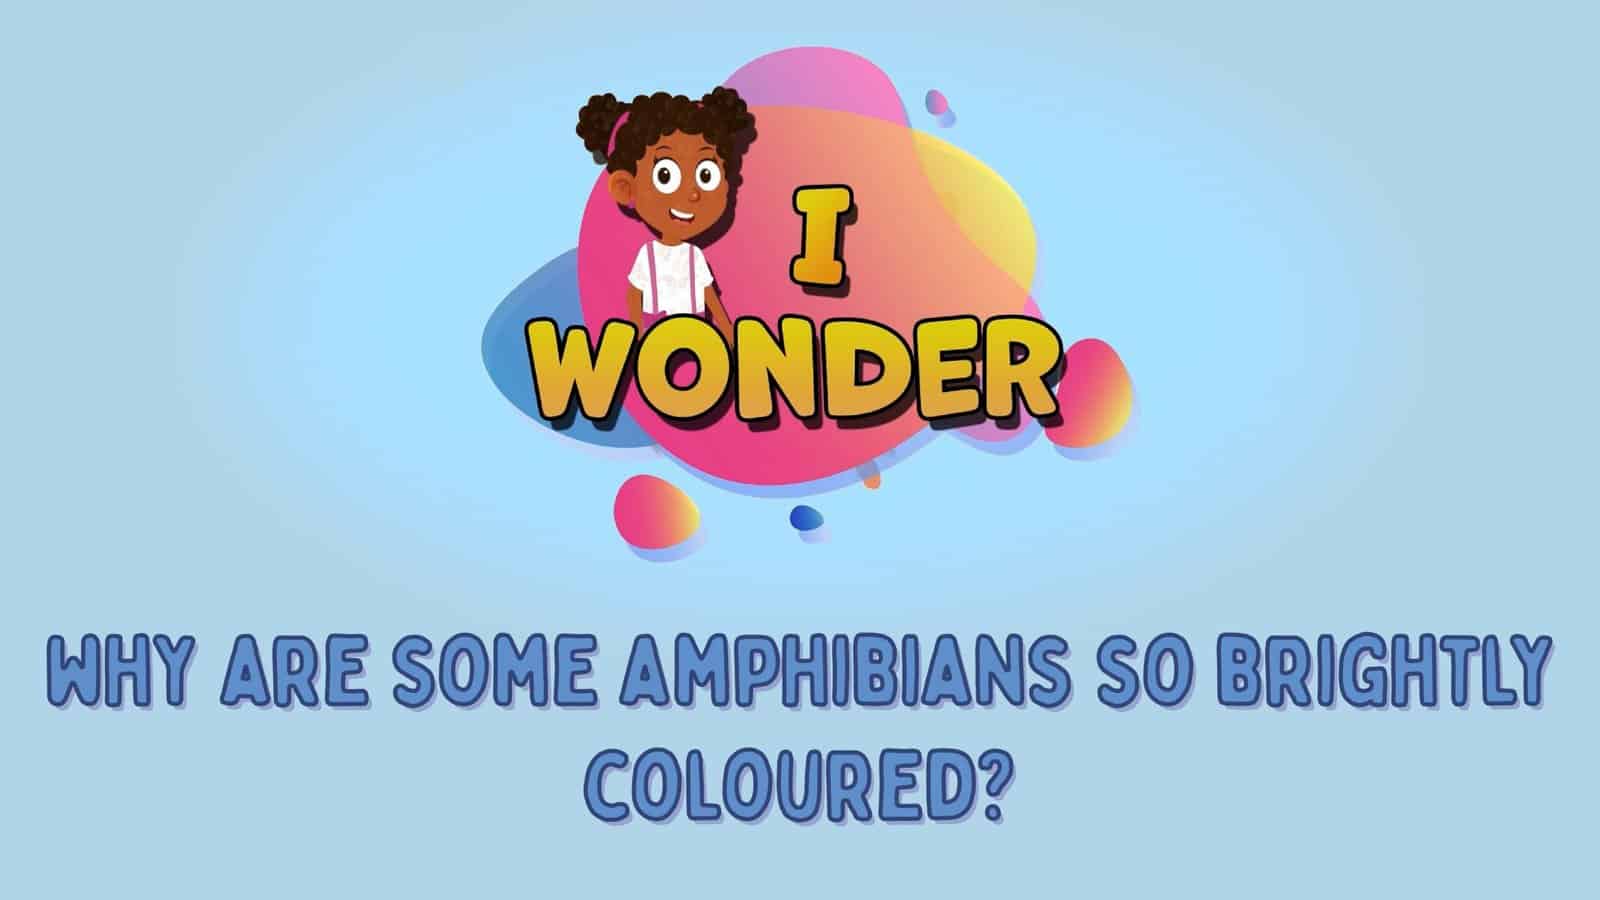 Why Are Some Amphibians So Brightly Coloured?